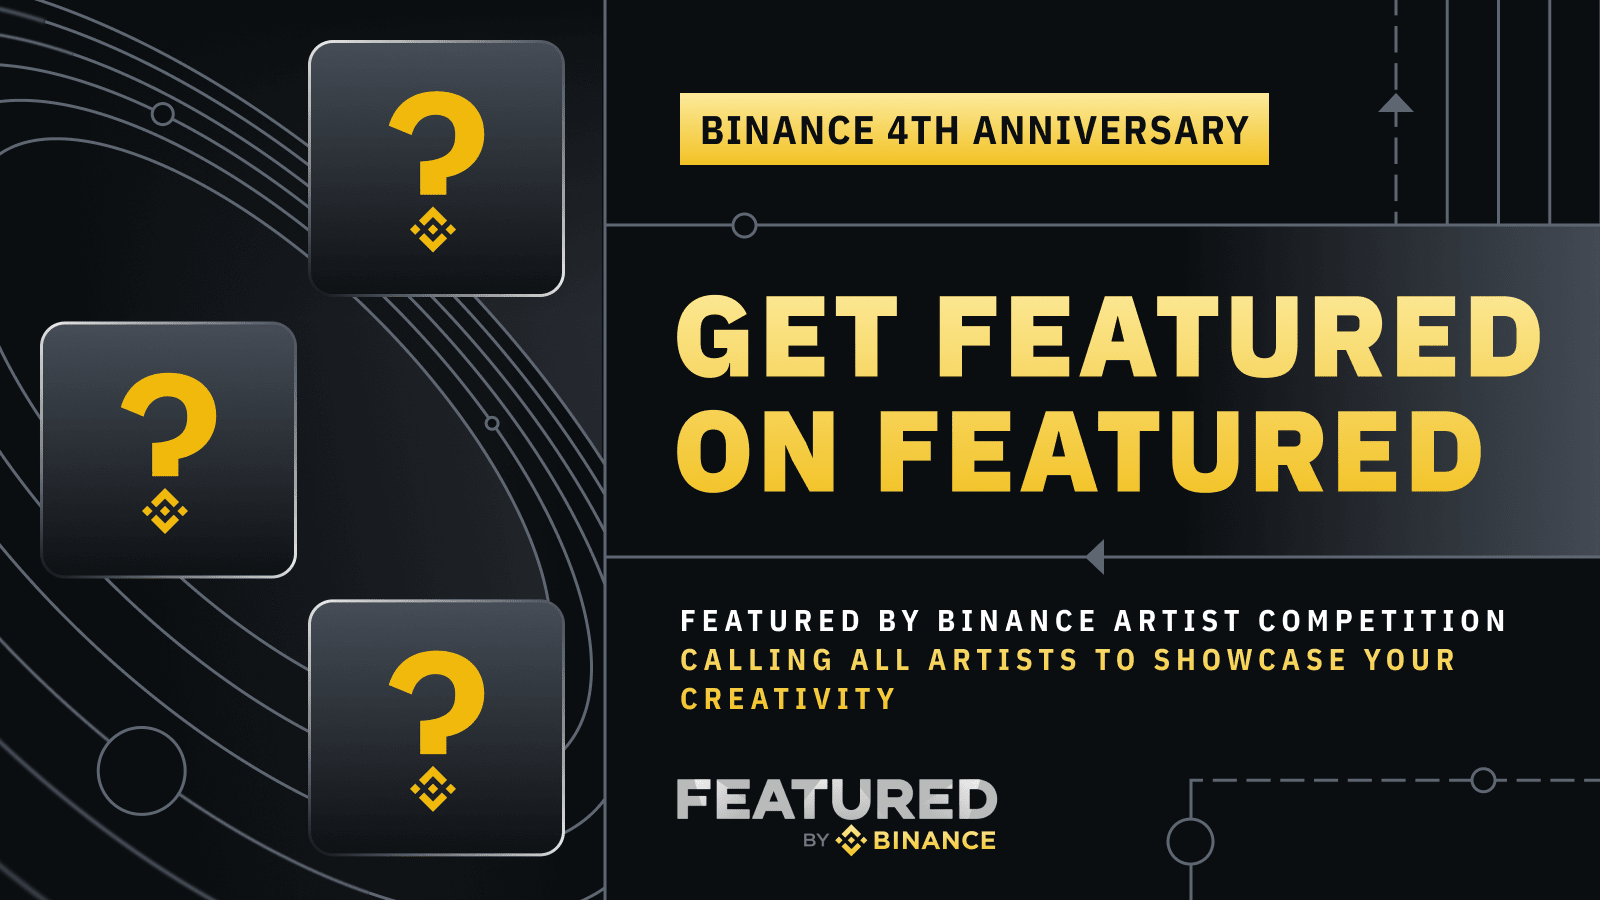 Get Your NFT Artwork “Featured by Binance” Call For